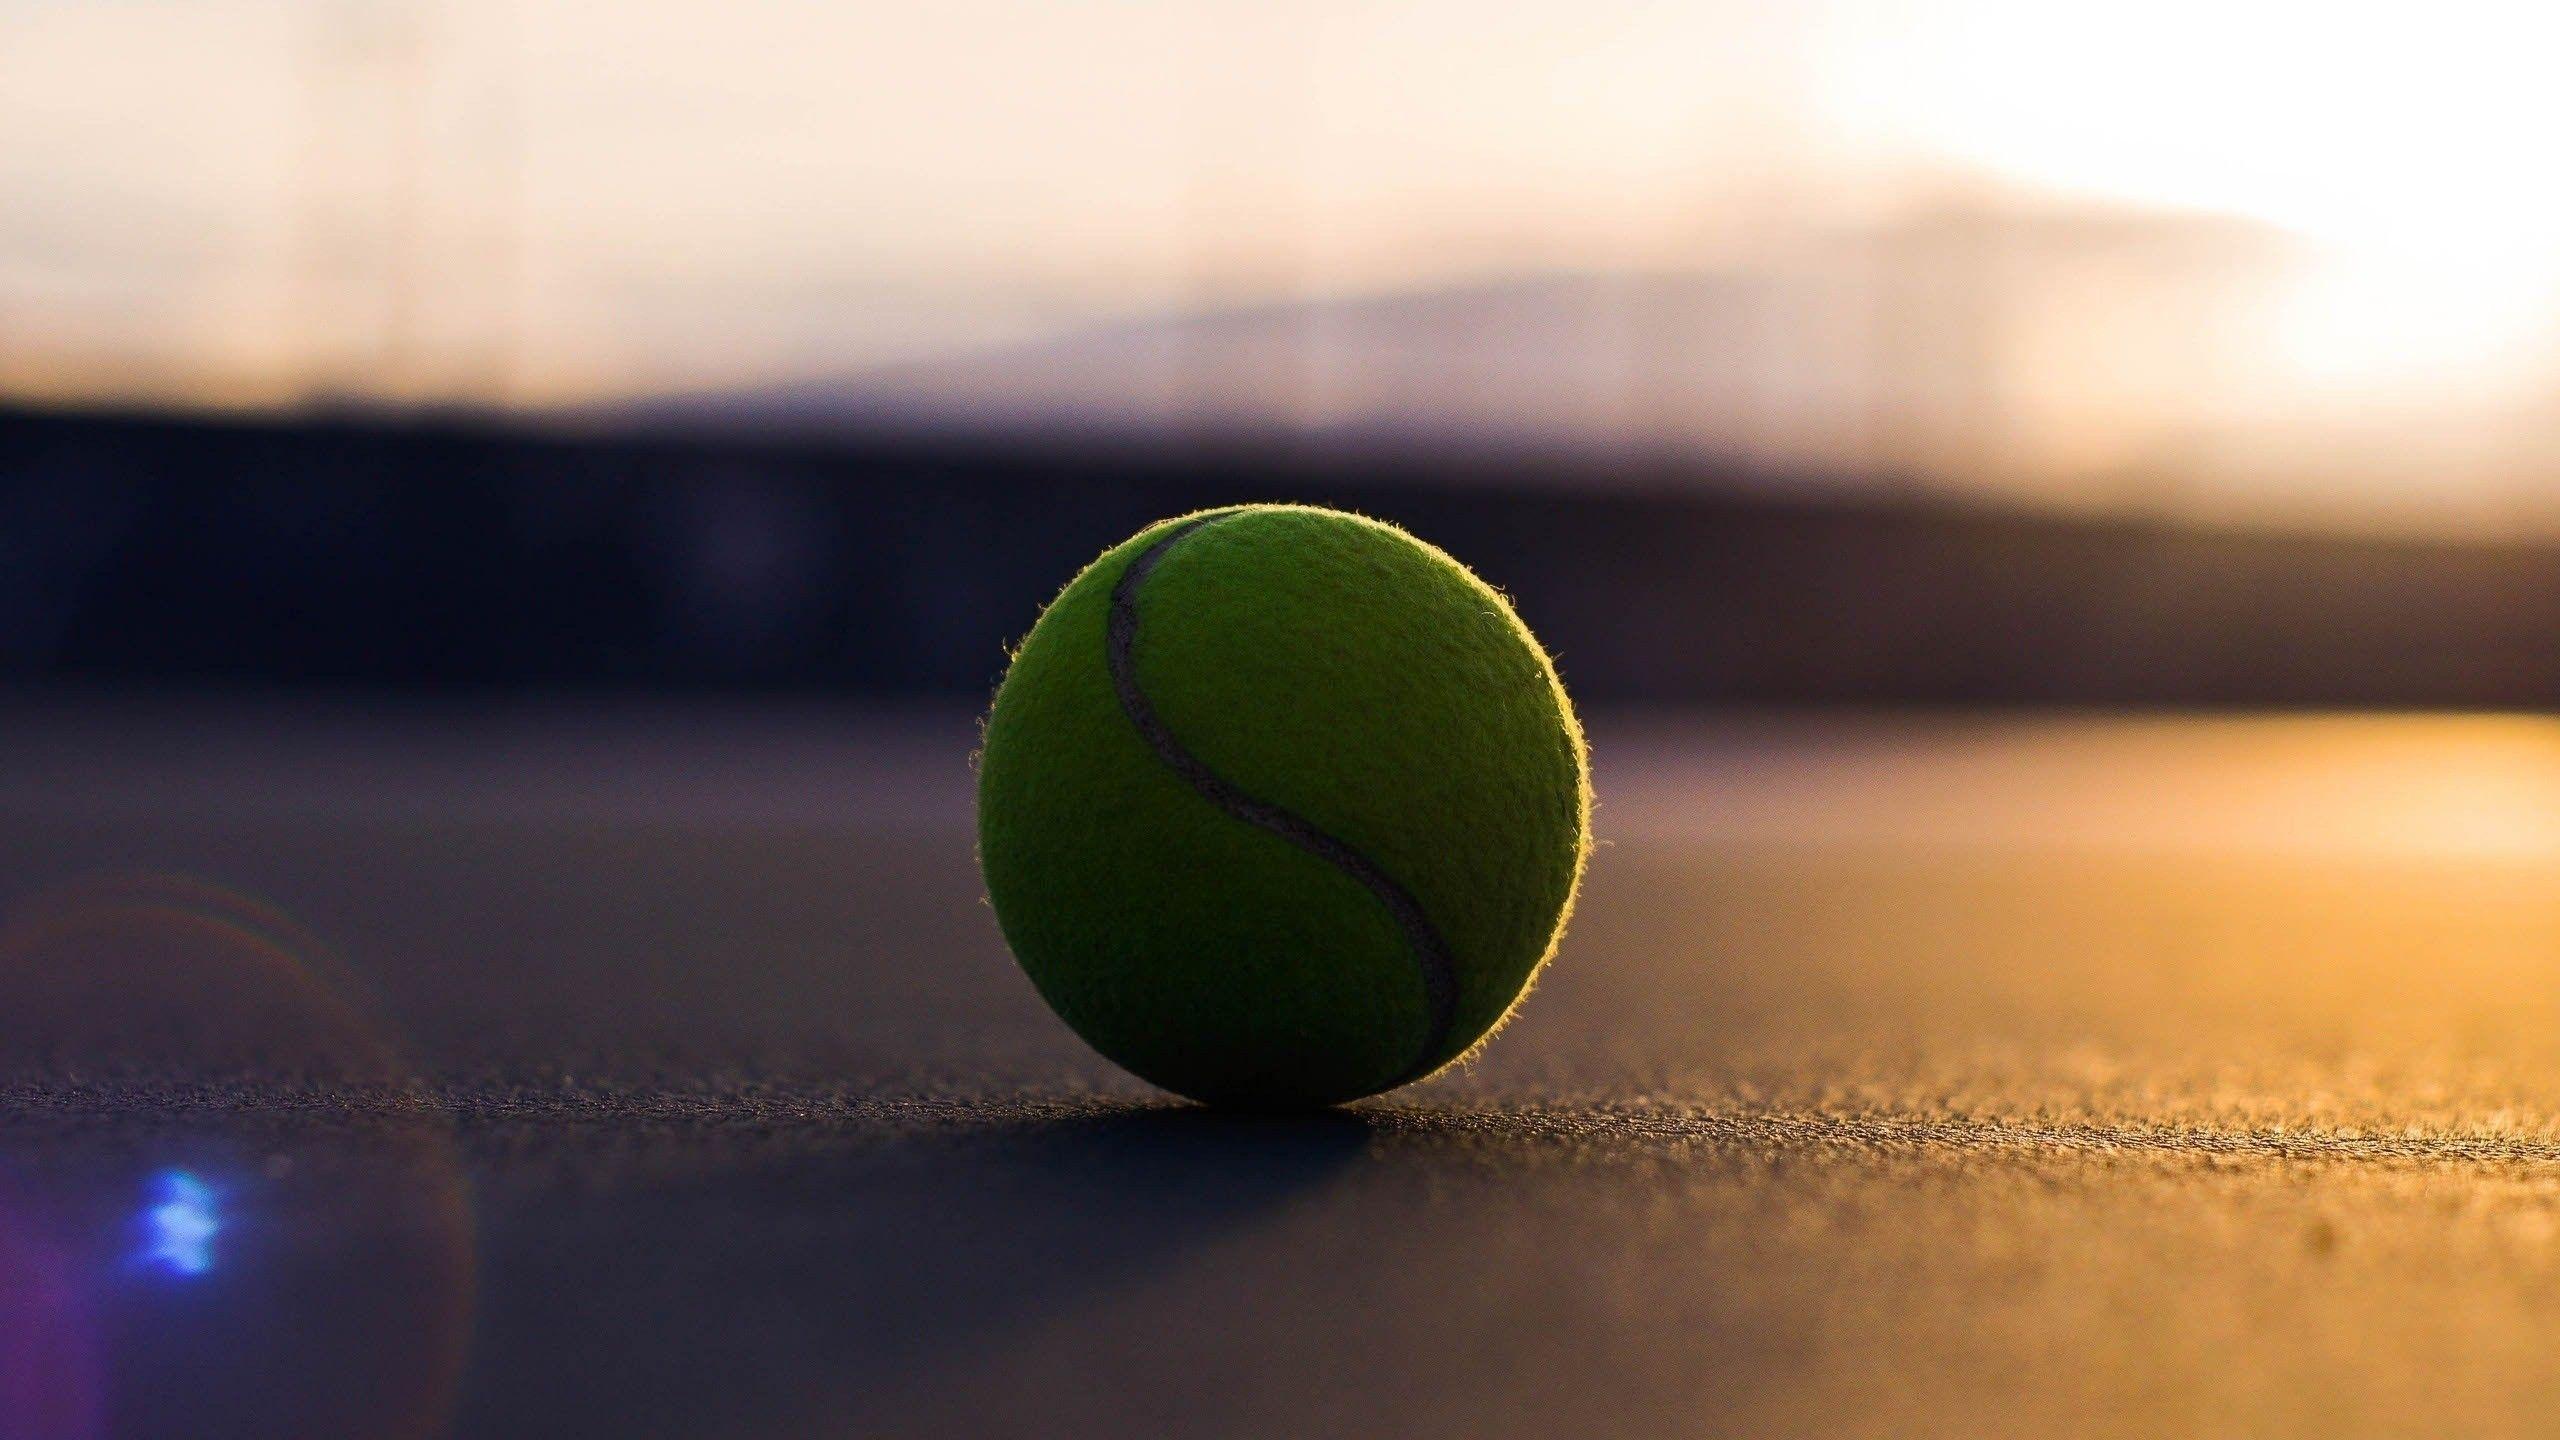 How to Bet on Tennis: Main Types of Bets and Strategies